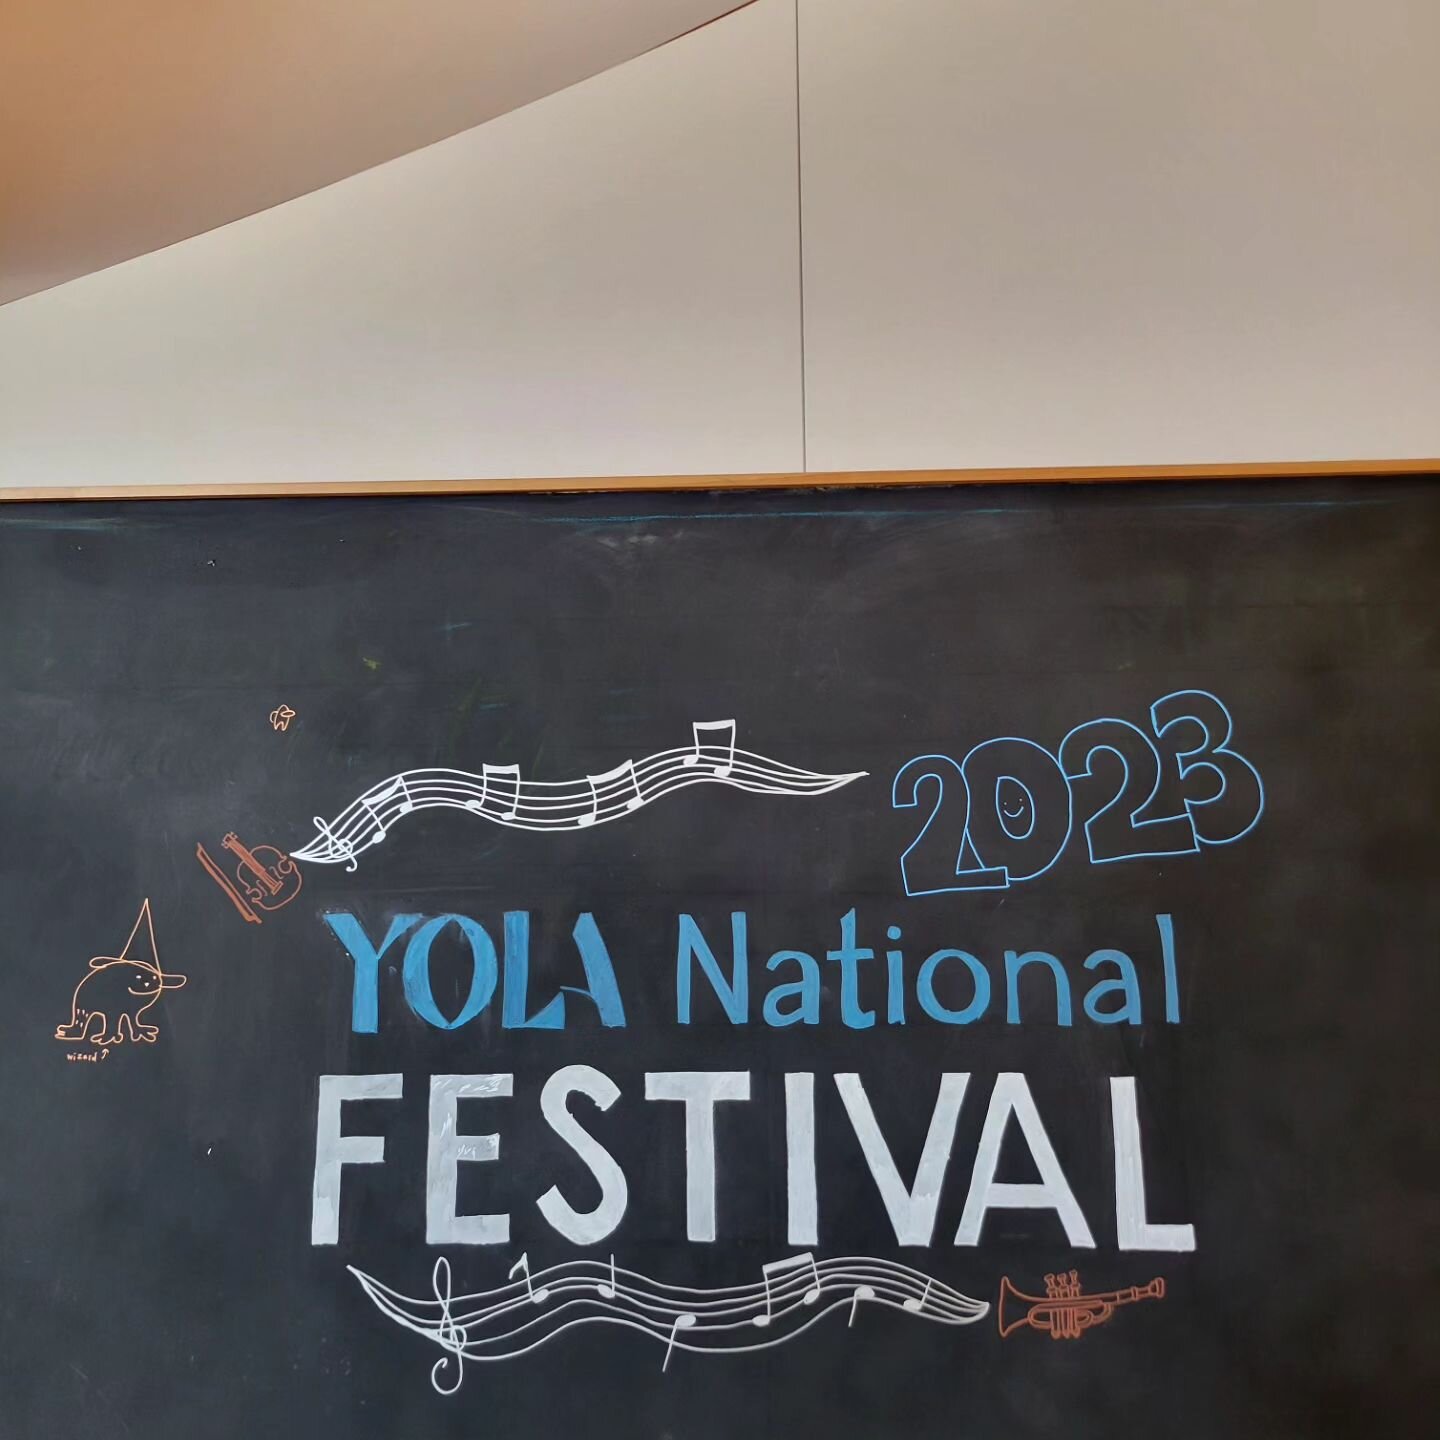 It was an absolute joy to have a part in this year's #YOLANationalFestival. We curated pre show art activities before the culmination concert. The young musicians were incredible&mdash;with a special guest on violin&mdash;and their hard work was appa